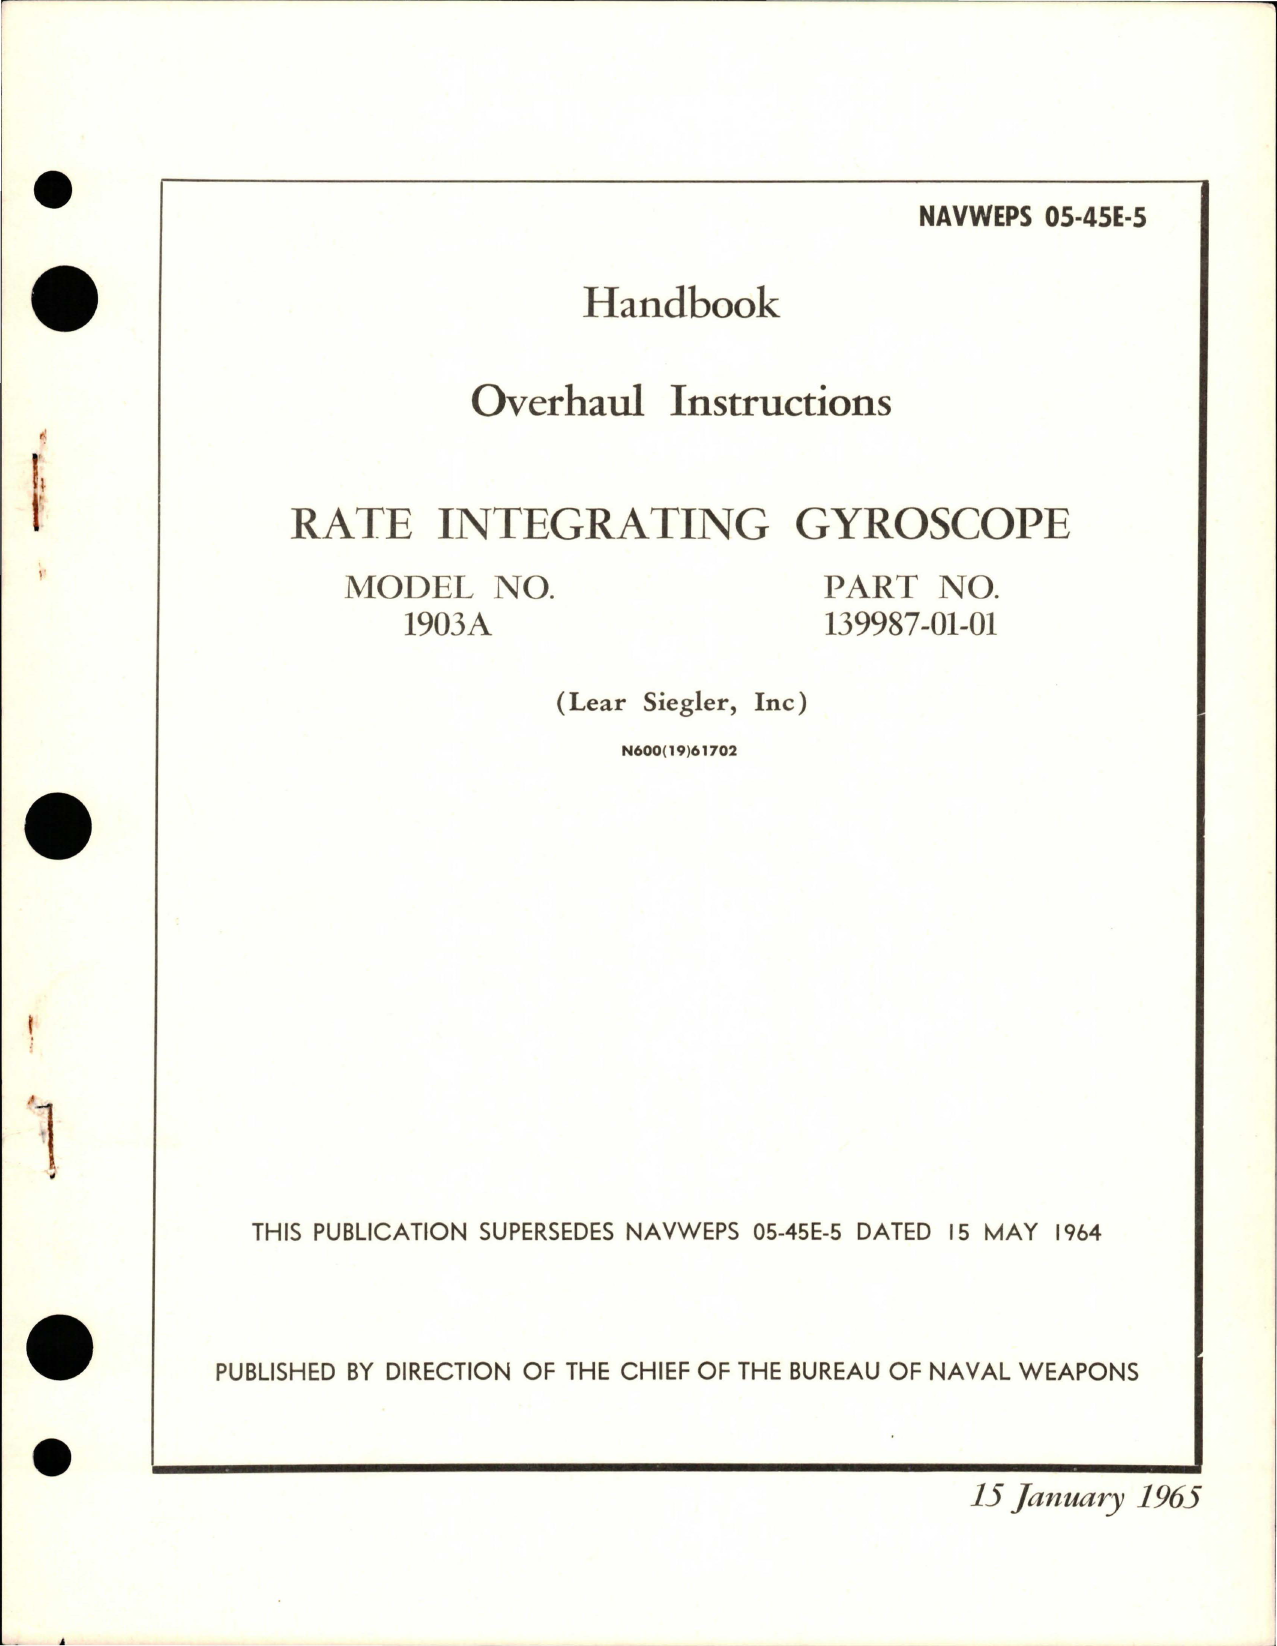 Sample page 1 from AirCorps Library document: Overhaul Instructions for Rate Integrating Gyroscope - Model 1903A